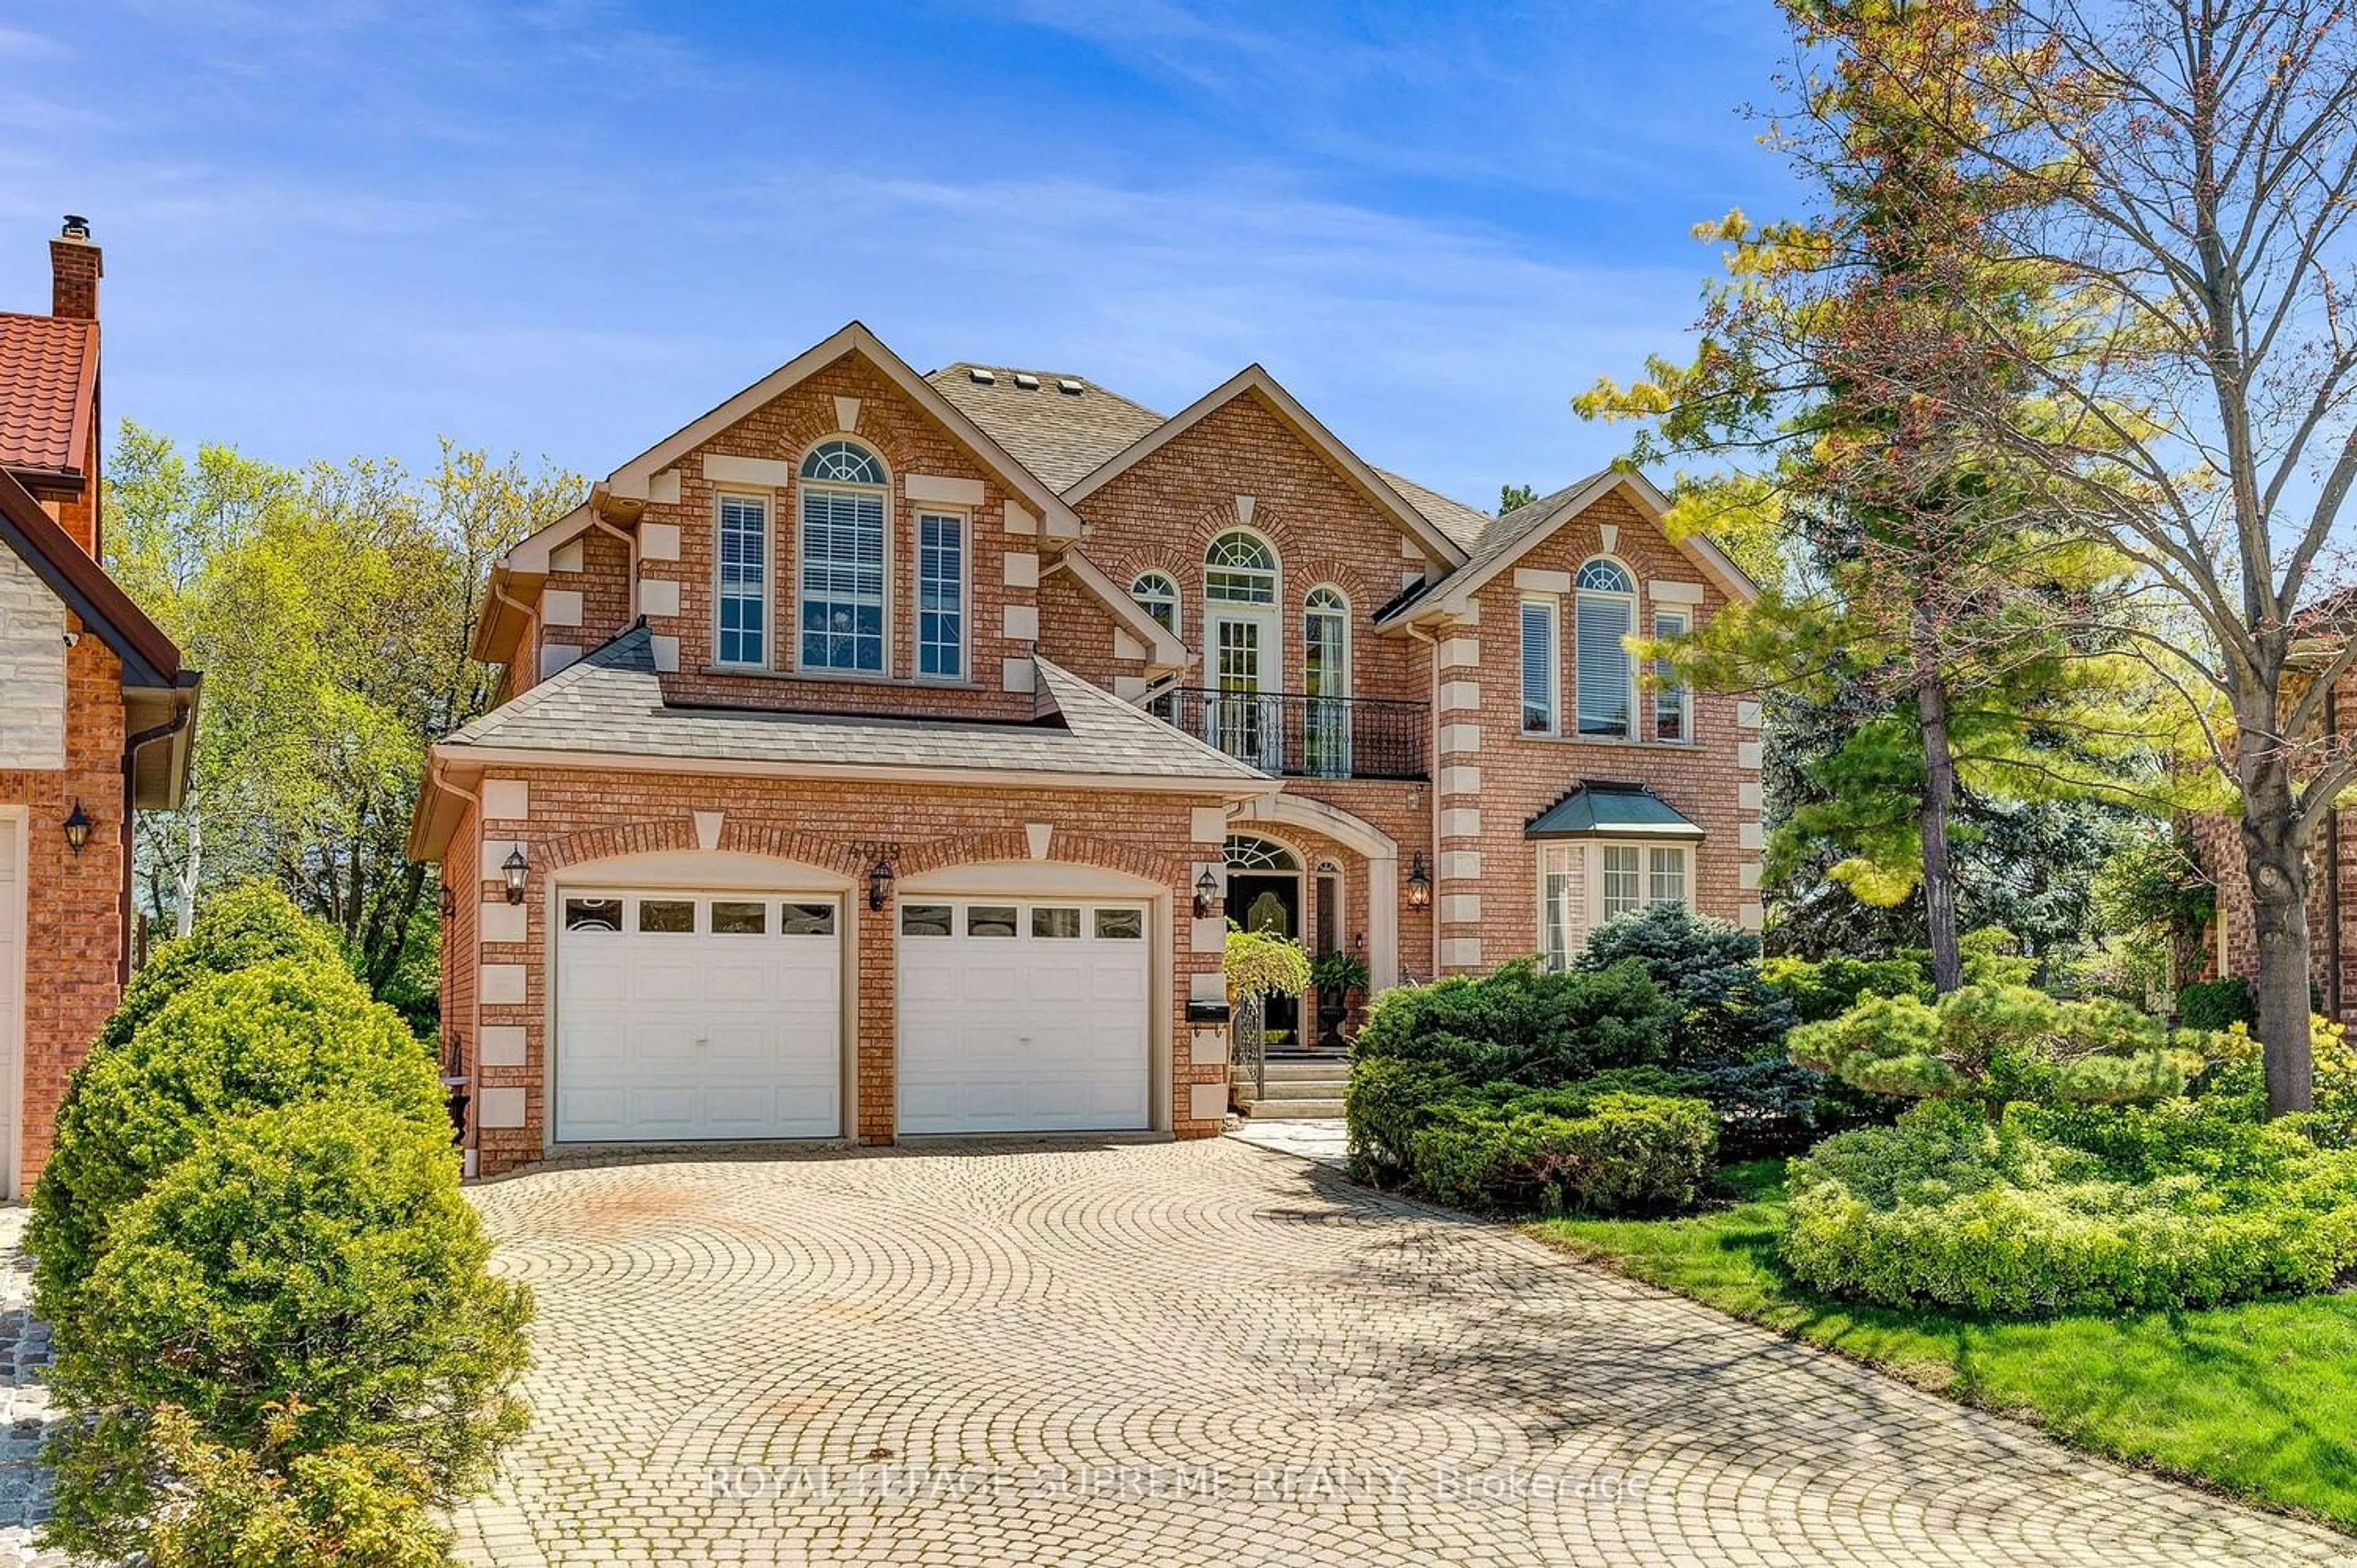 Home with brick exterior material for 4019 Lookout Crt, Mississauga Ontario L4W 4E9